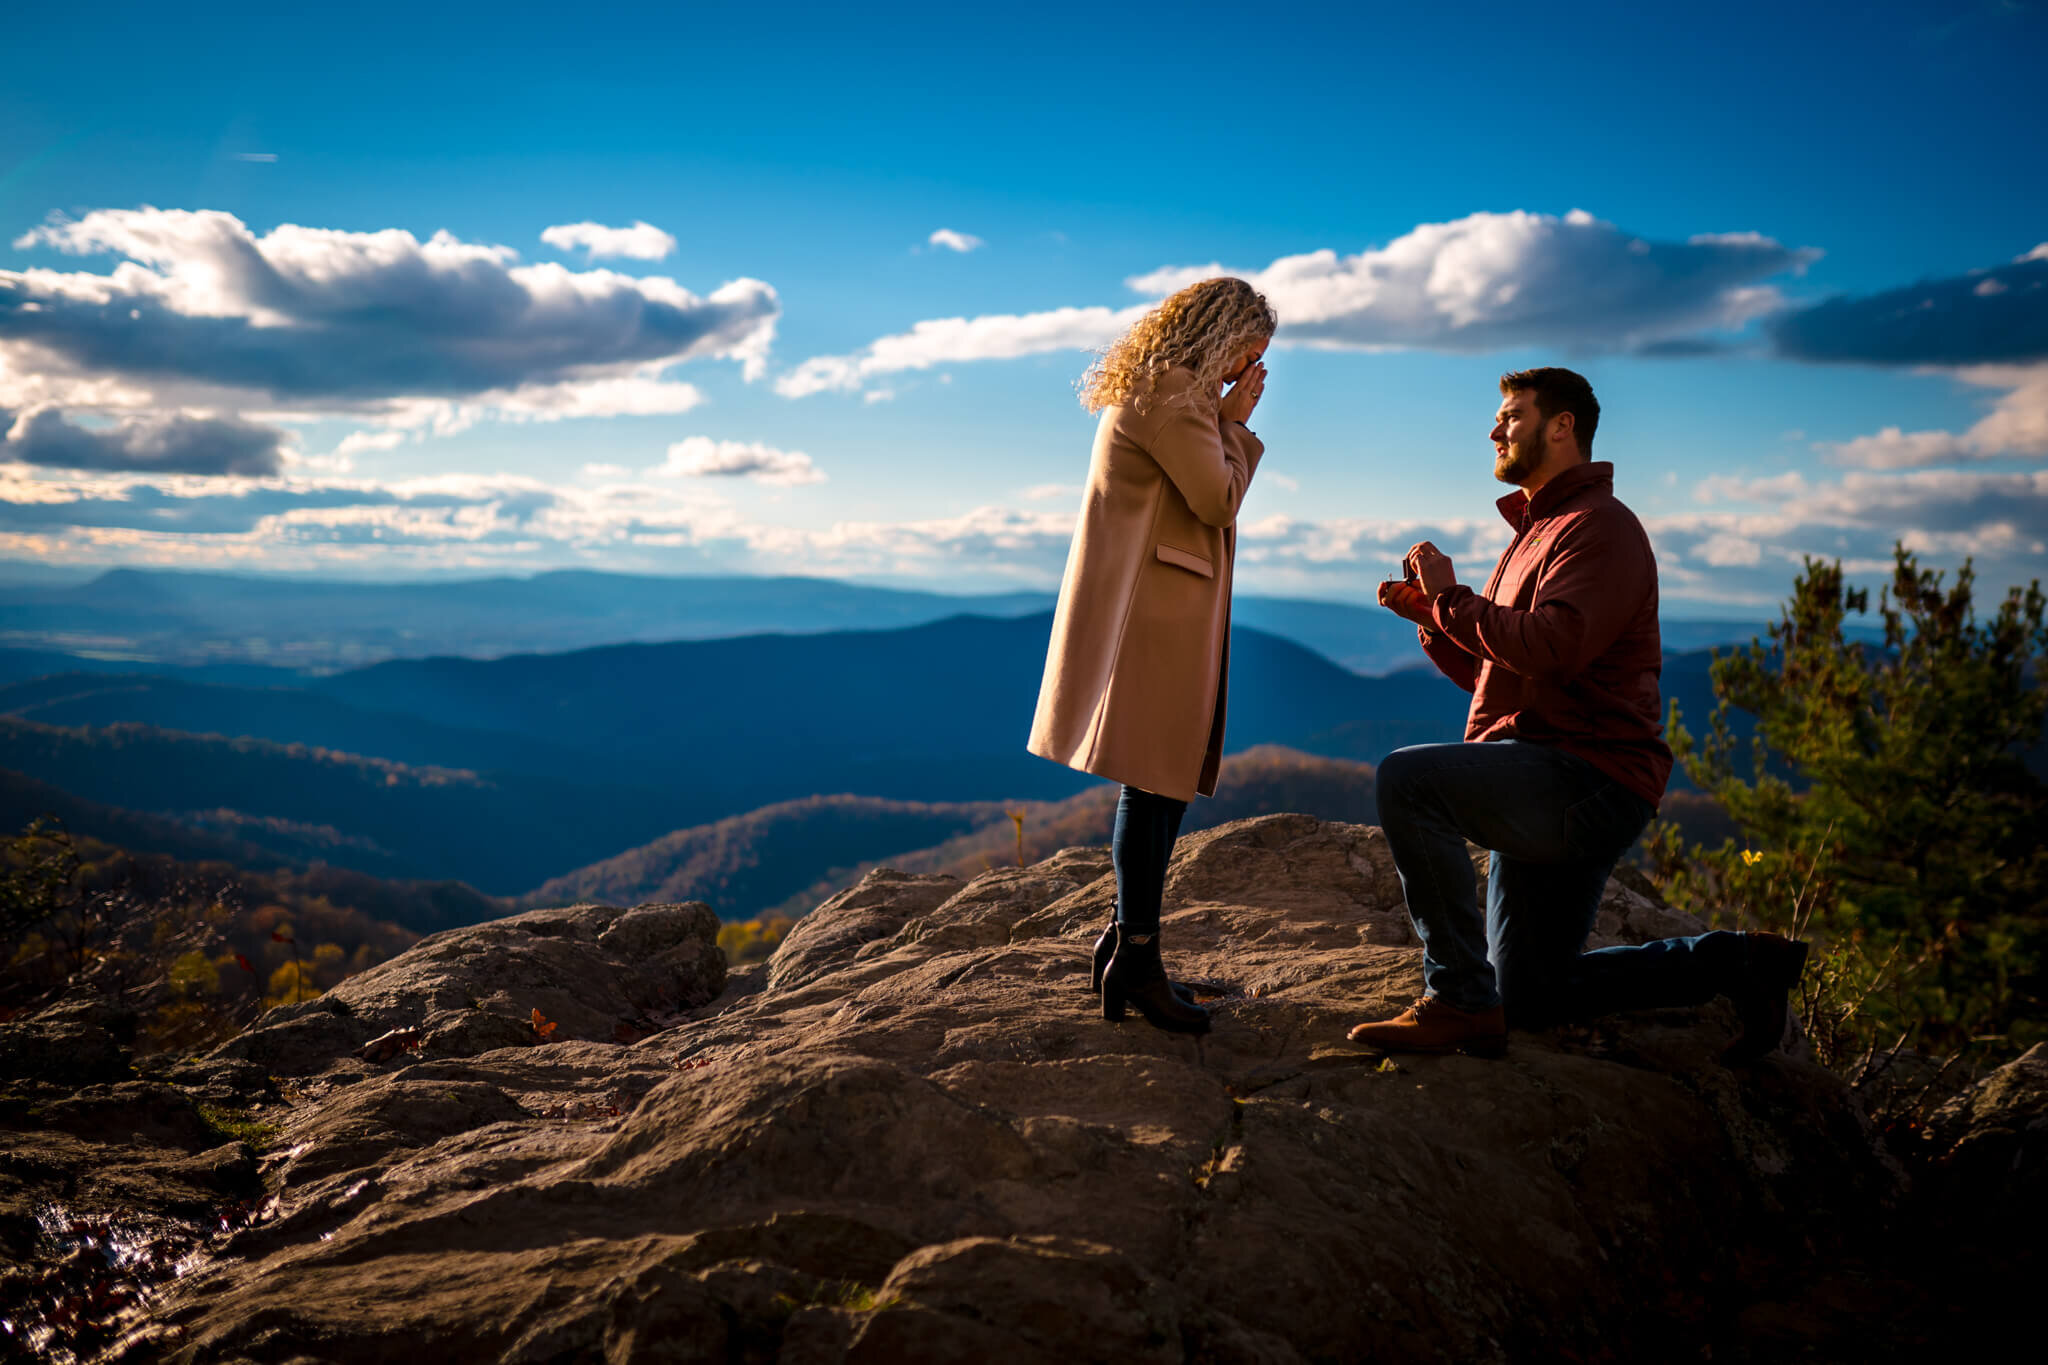 Surprise-Proposal-The-Point-Overlook-Shenandoah-National-Park-Photography-by-Bee-Two-Sweet-11.jpg